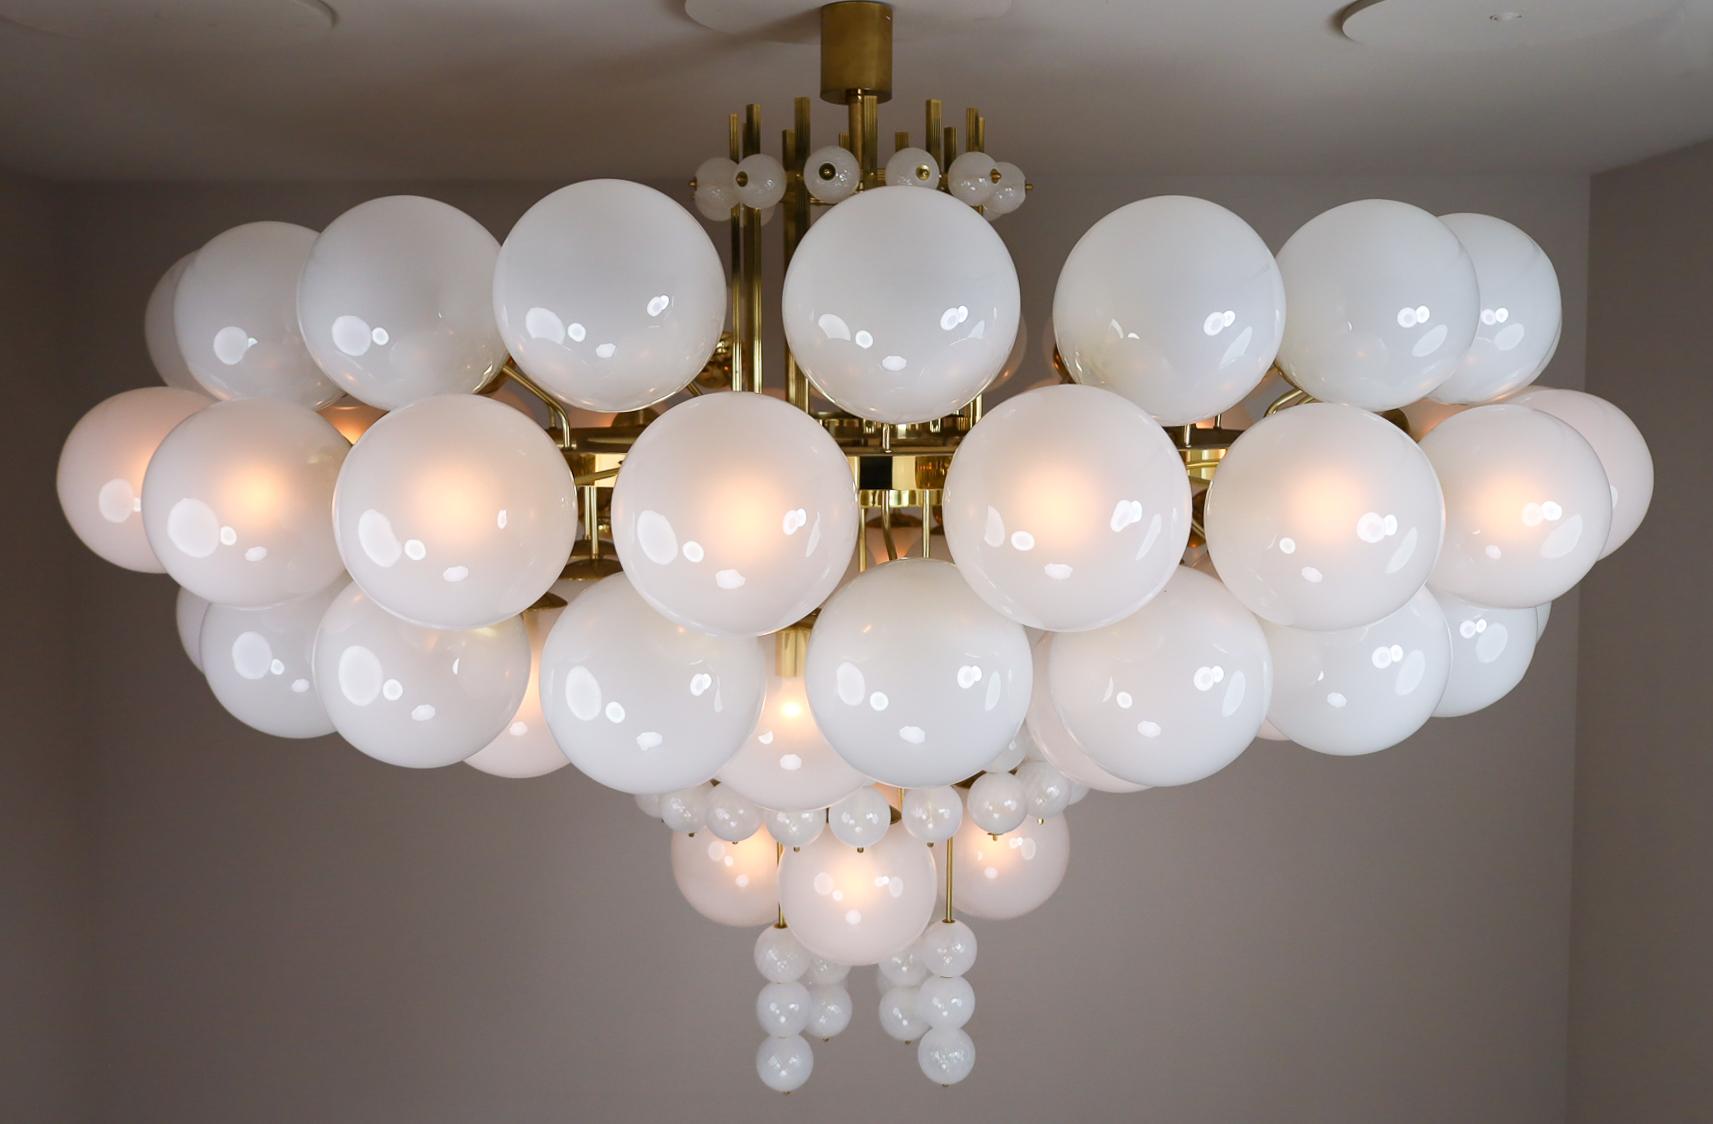 XXL Hotel Chandelier with Brass Fixture and Hand-Blowed Frosted Glass Globes 5